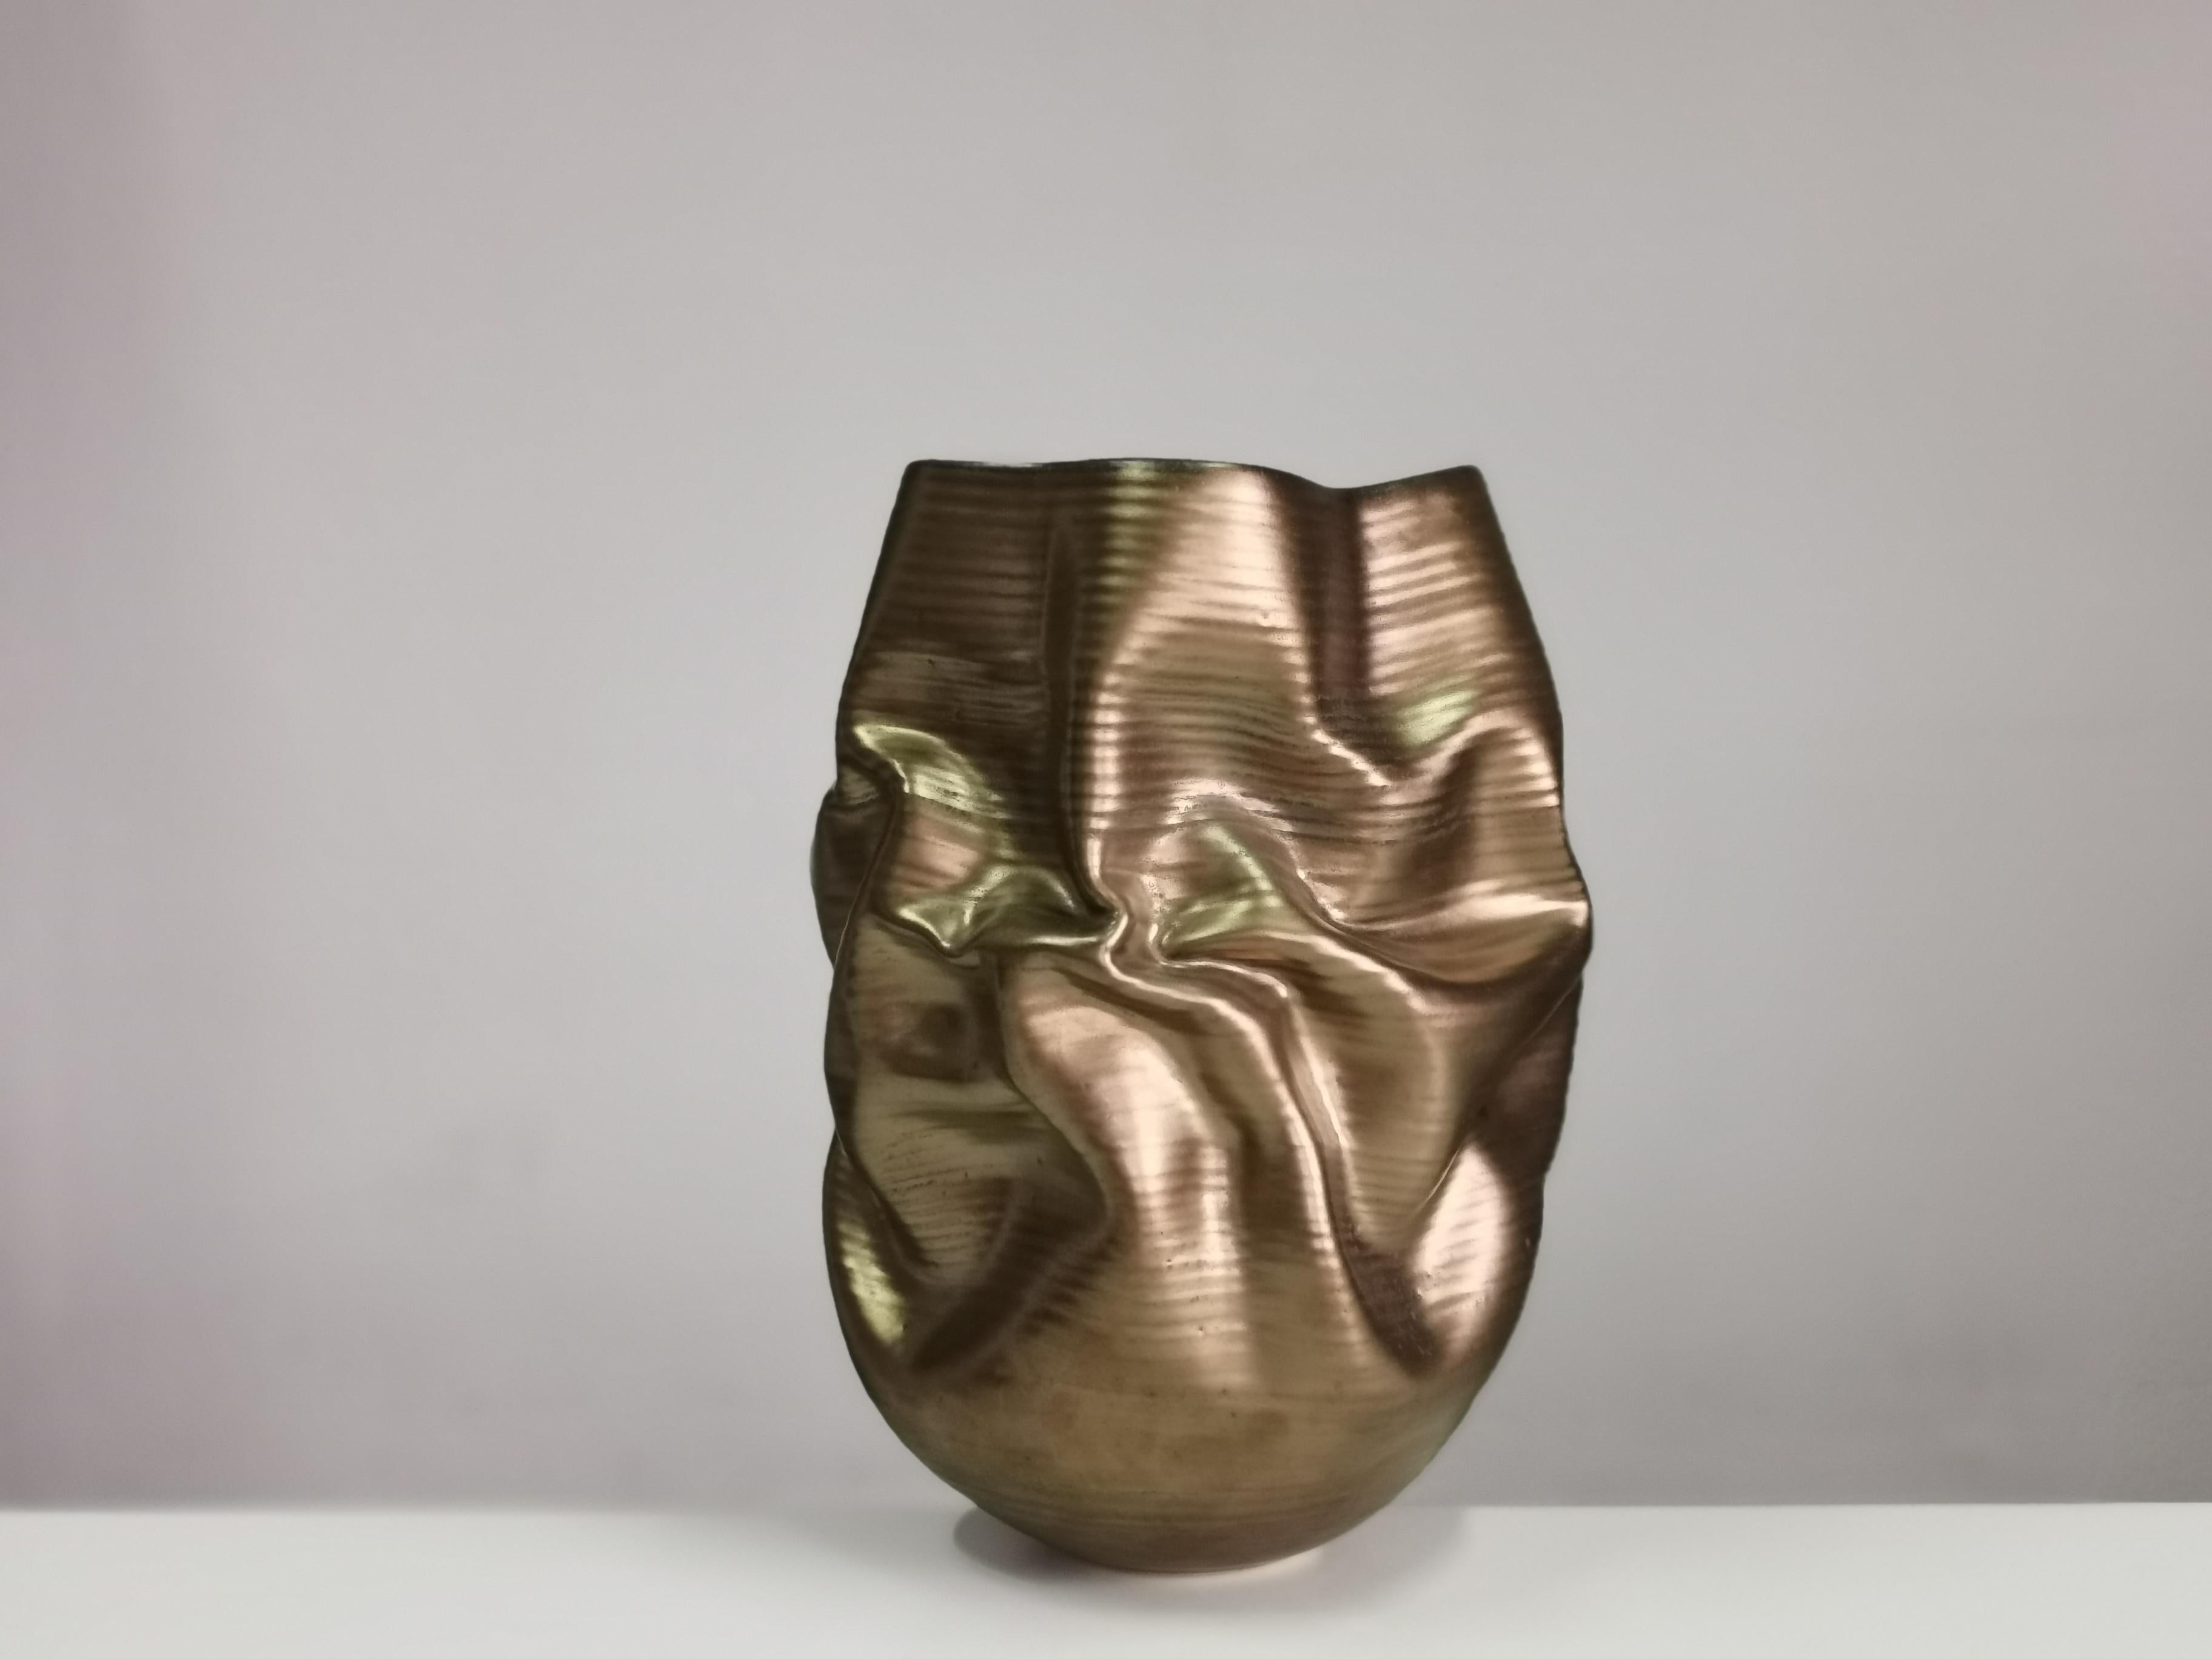 New sumptuous ceramic vessel from ceramic artist Nicholas Arroyave-Portela. Made in 2021.

Materials: White St.Thomas clay, Stoneware glazes, multi fired to cone 6 (1225 degrees)

Measures: 38 cm tall, 26 cm wide, 26 cm deep
Weight: 3.9 Kg


The